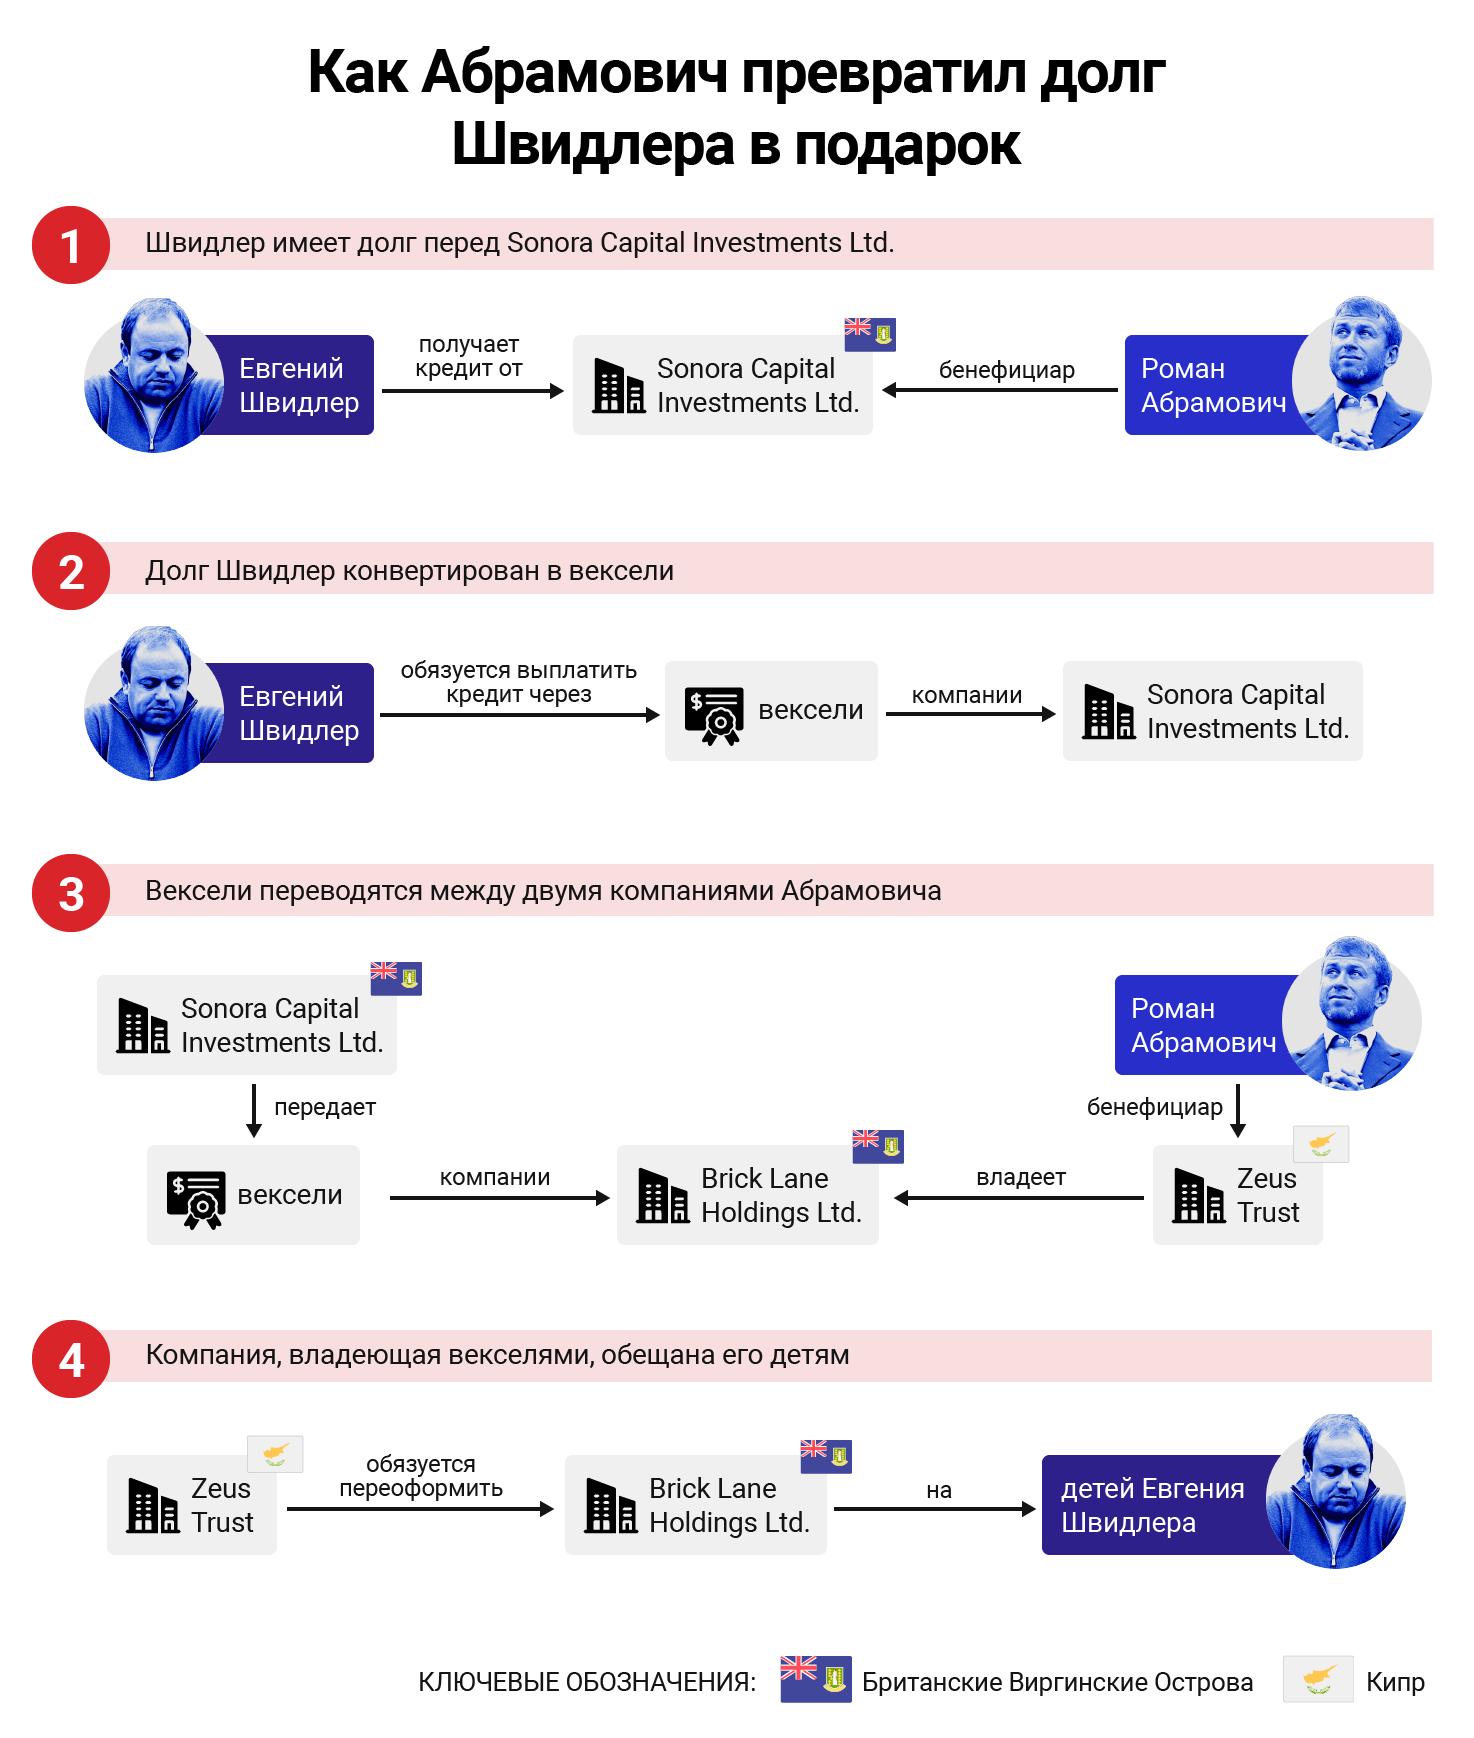 cyprus-confidential/cyprus-shvidlers-debt-infographic-2-rus.png